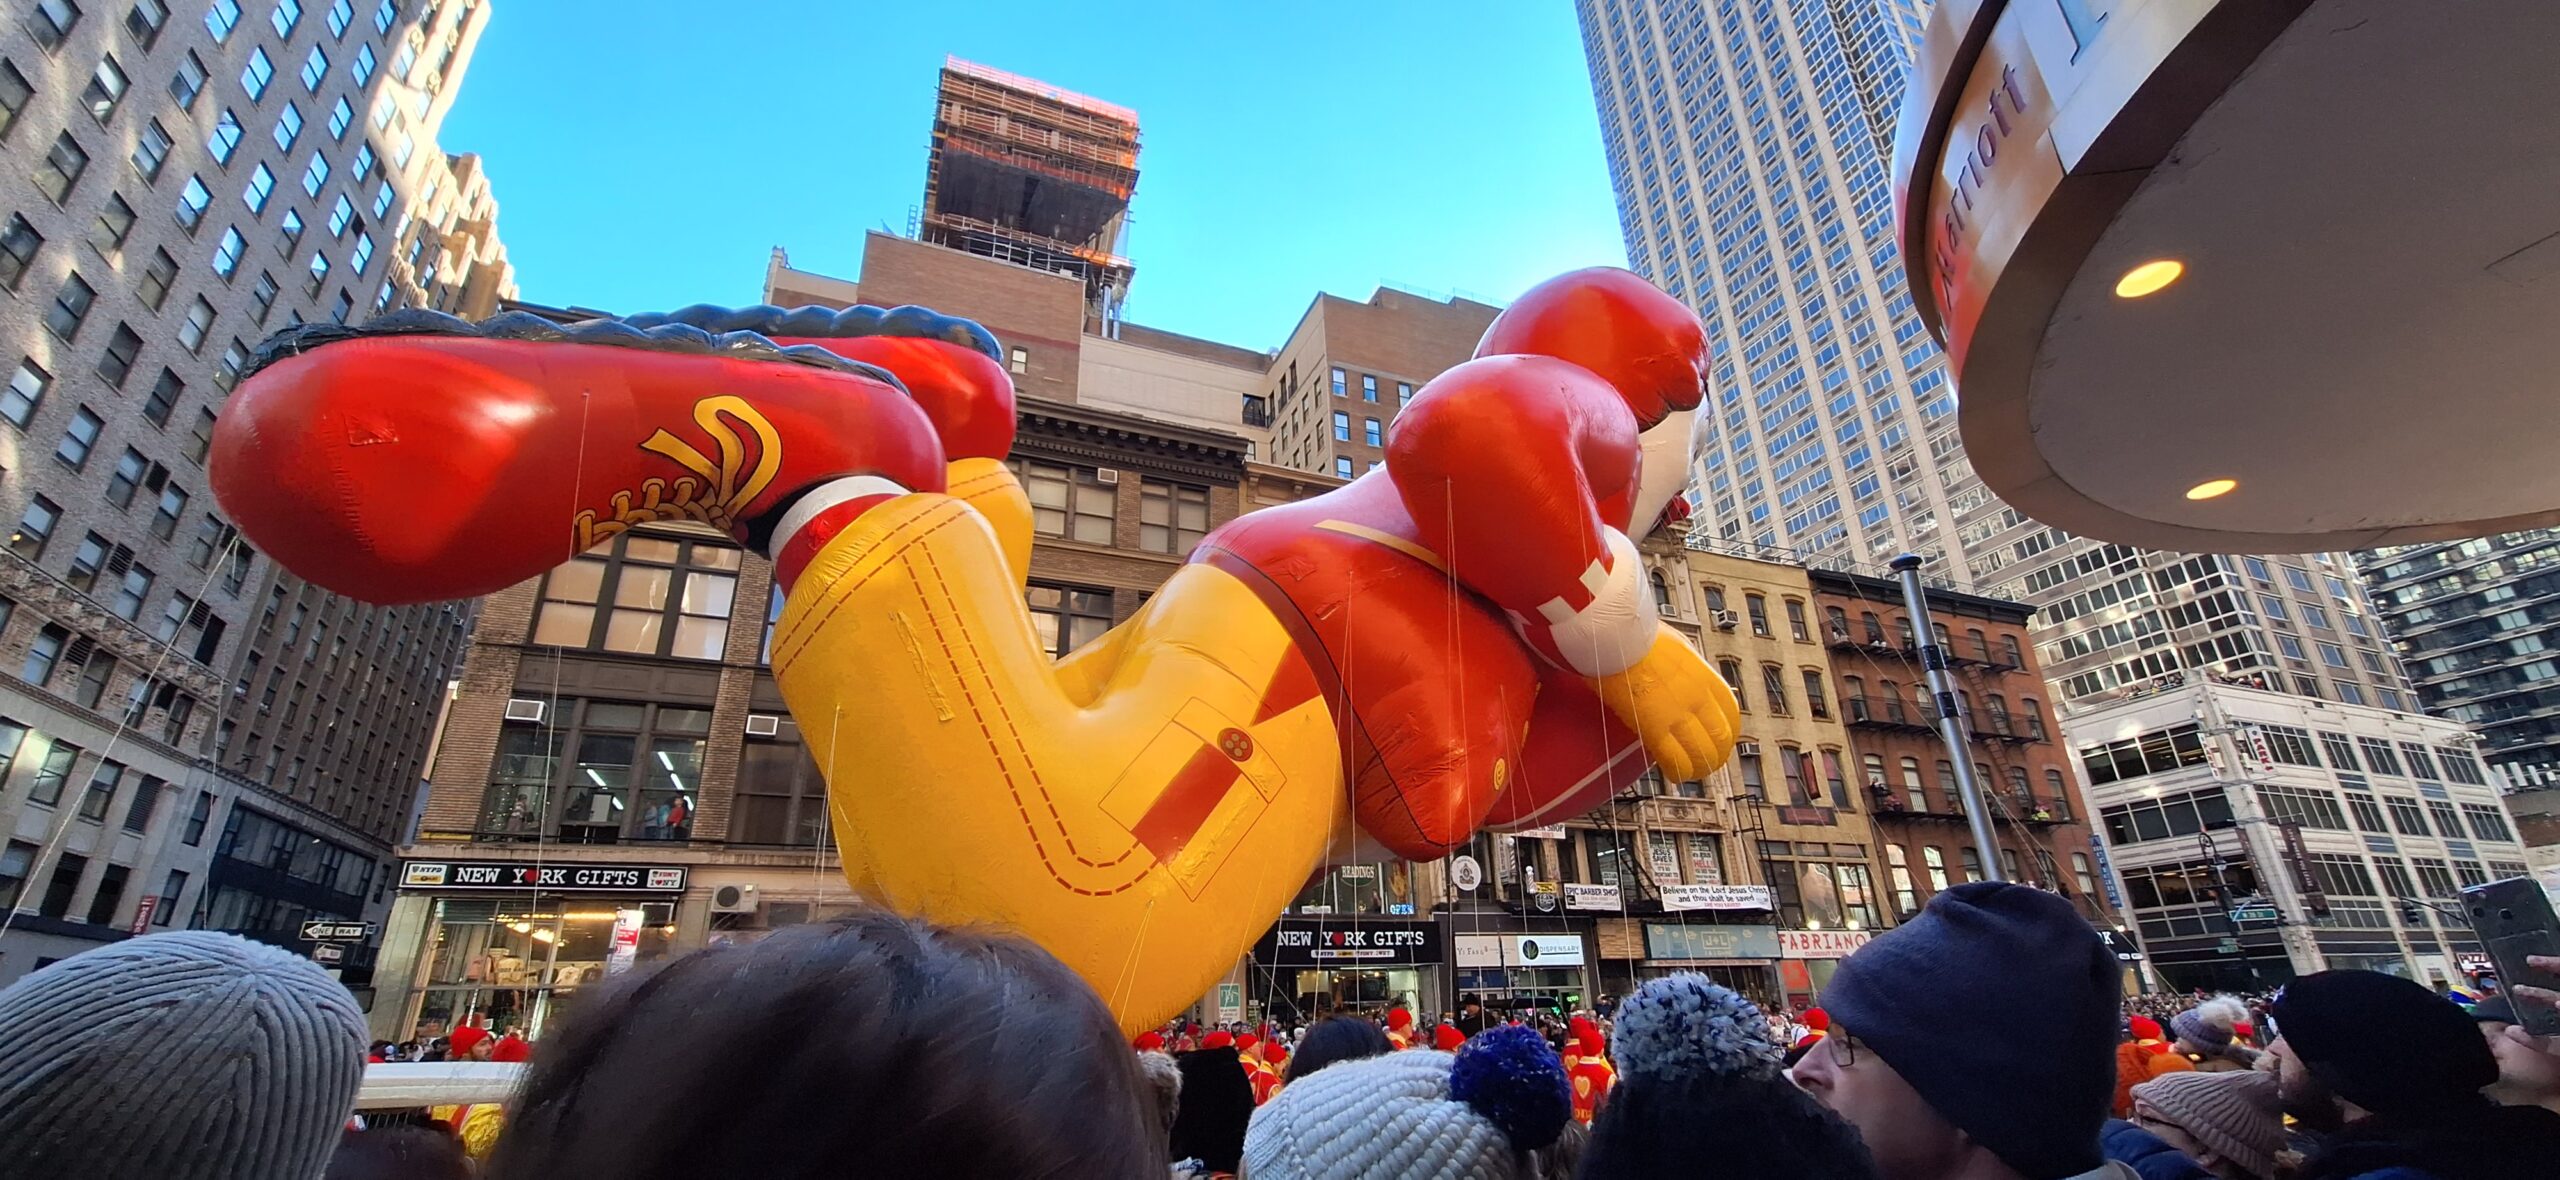 a large inflatable balloon in a city